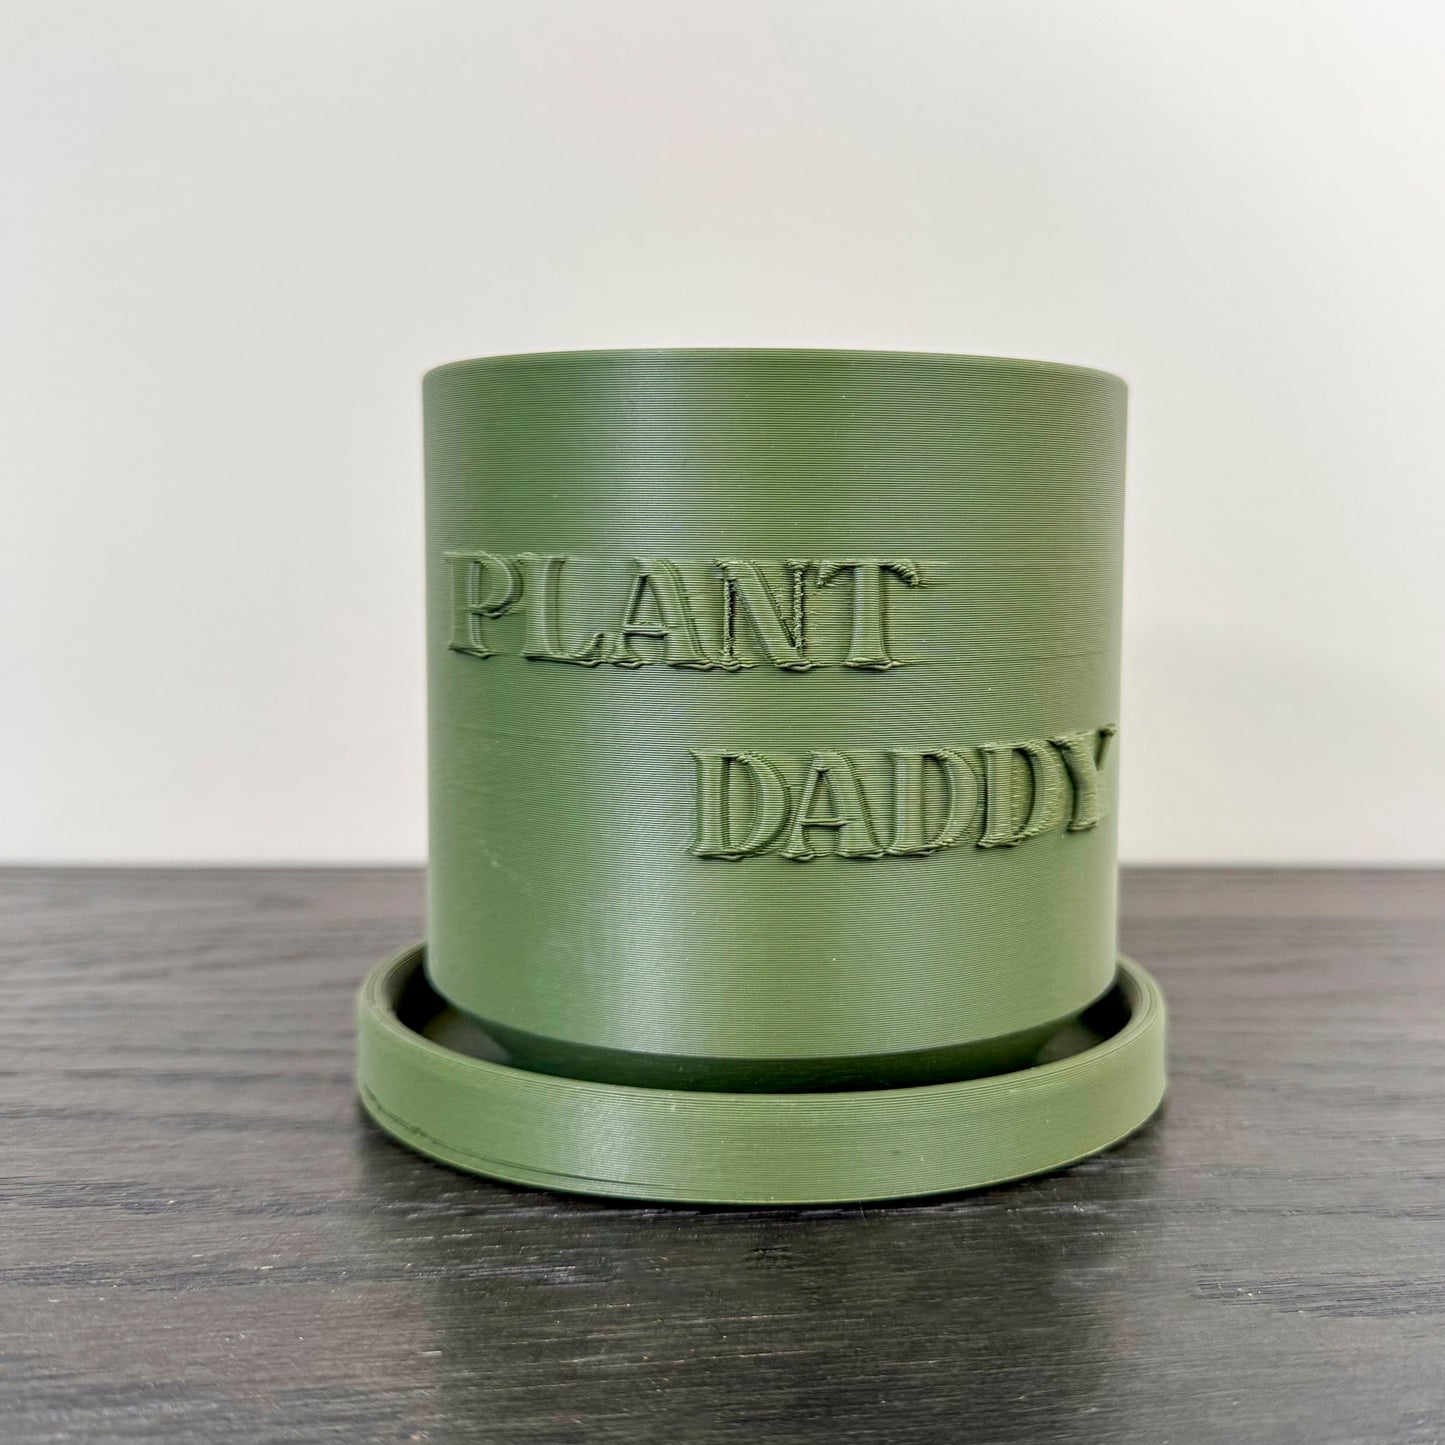 Green 3D printed plant daddy planter